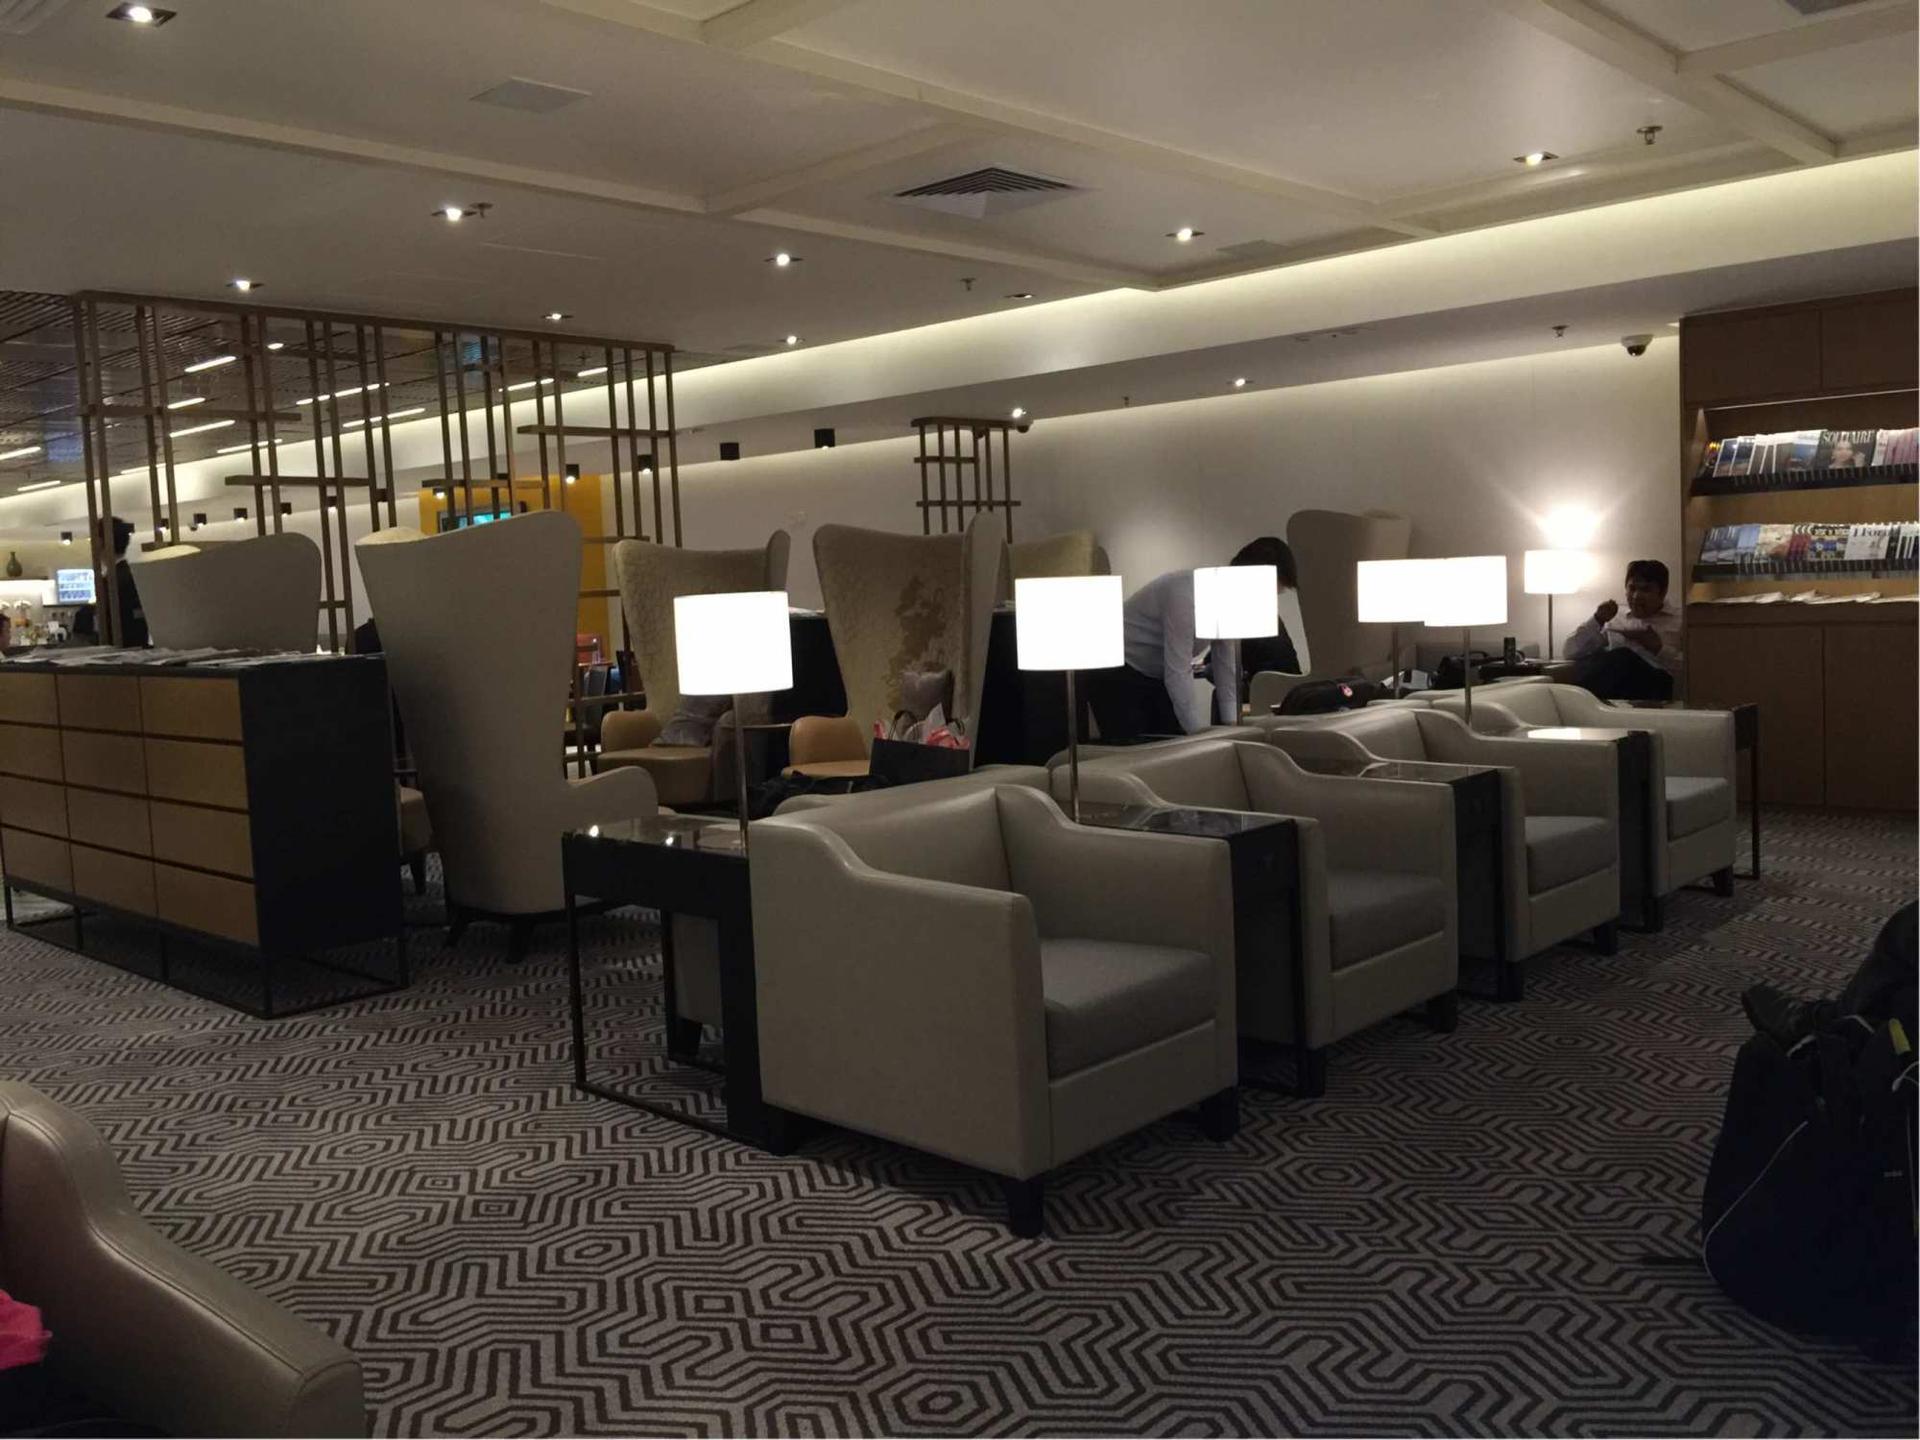 Singapore Airlines SilverKris Business Class Lounge image 5 of 68